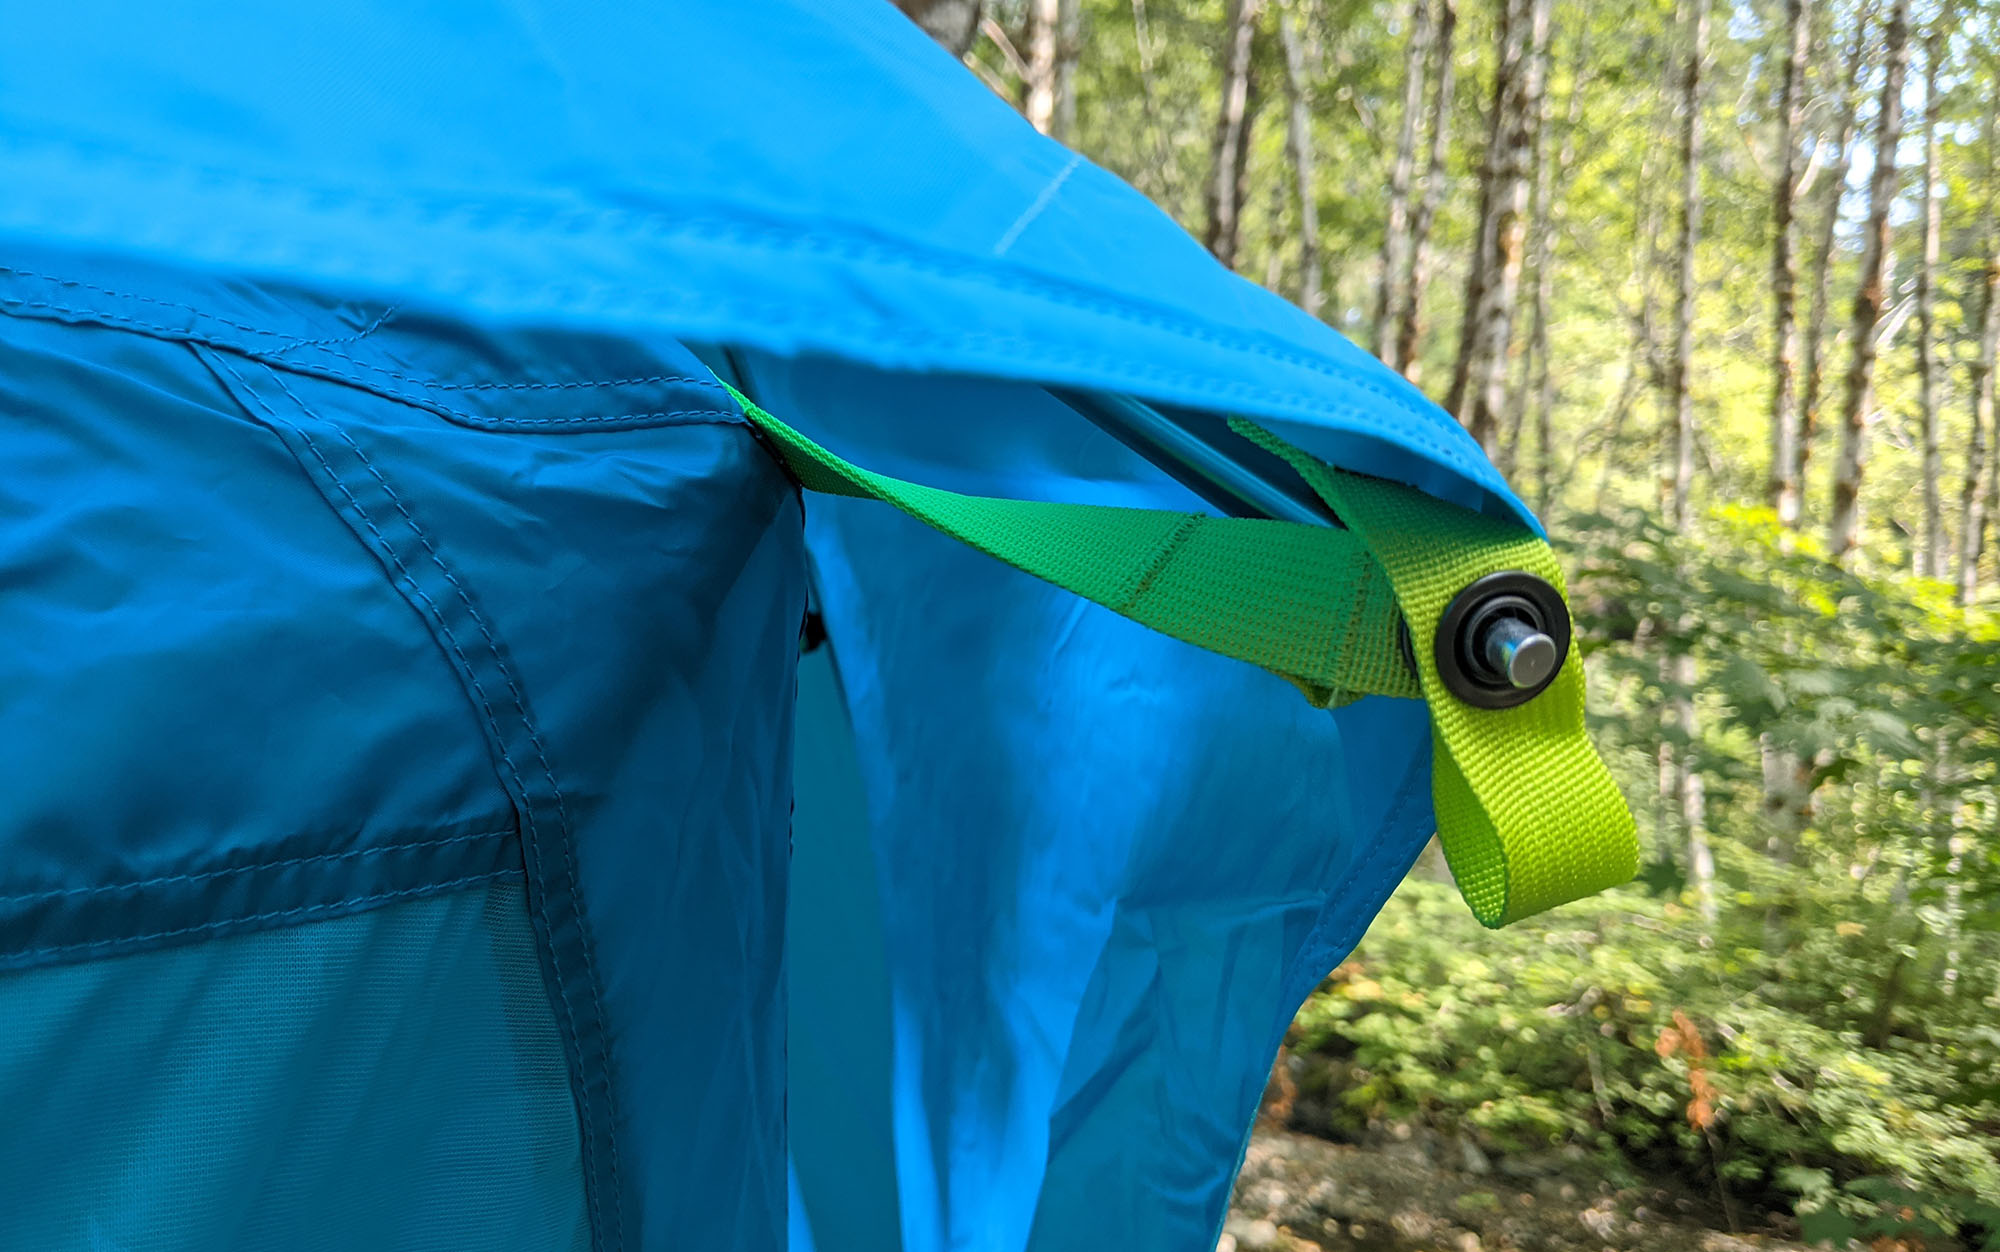 The rainfly for the NEMO Aurora Highrise 6P tent is held taut by the two lengthwise poles, which helps with protection from the elements even if you canât properly stake out the rain fly in tough ground. 